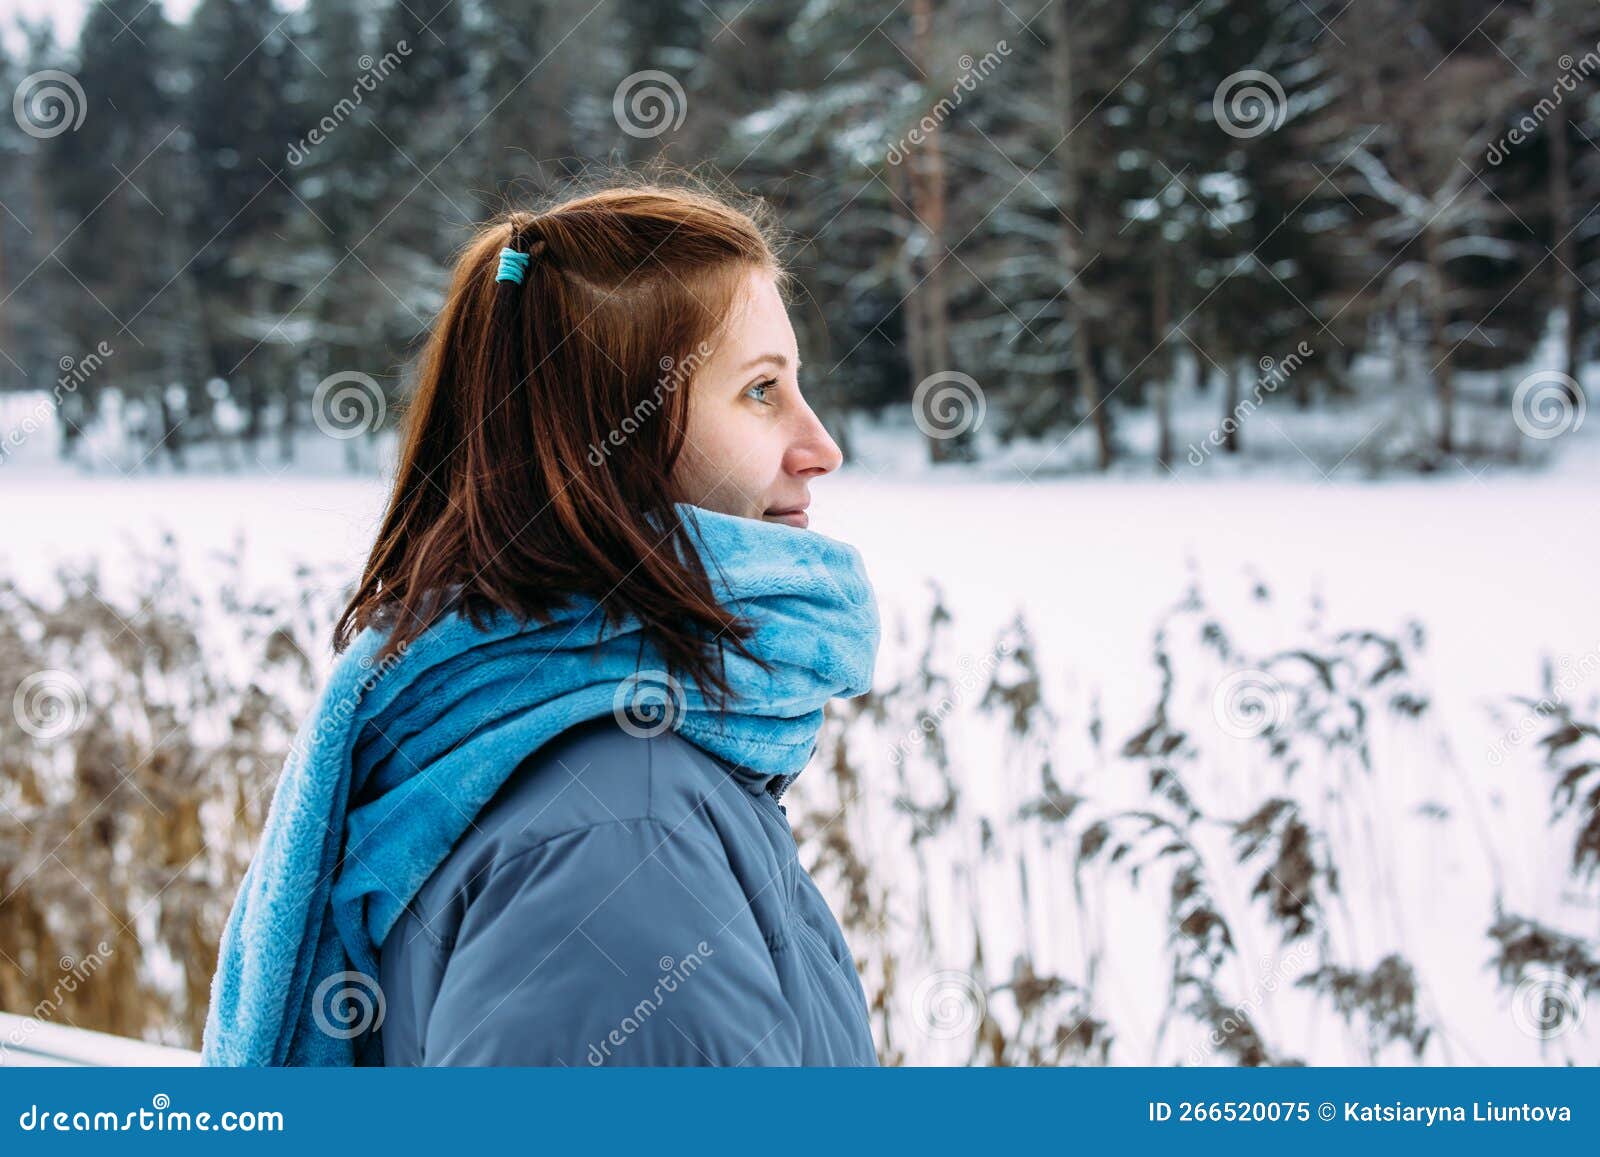 Portrait of Woman in Winter Clothes on the Nature. There is a Lot of Snow  Around Stock Image - Image of park, girl: 266520075